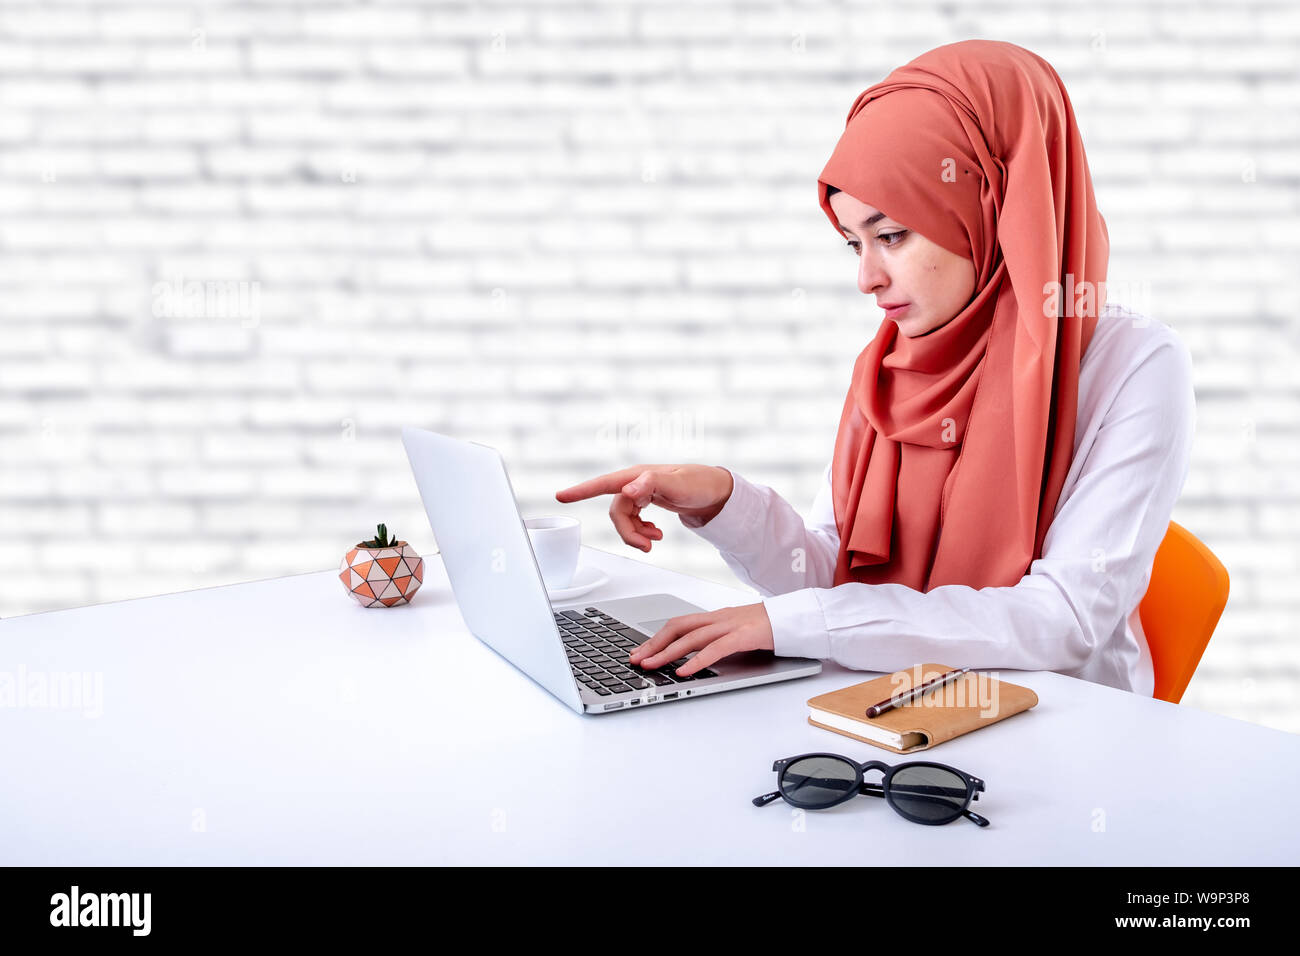 Muslim woman work with computer in office, hijab muslim girl pointing laptop screen Stock Photo